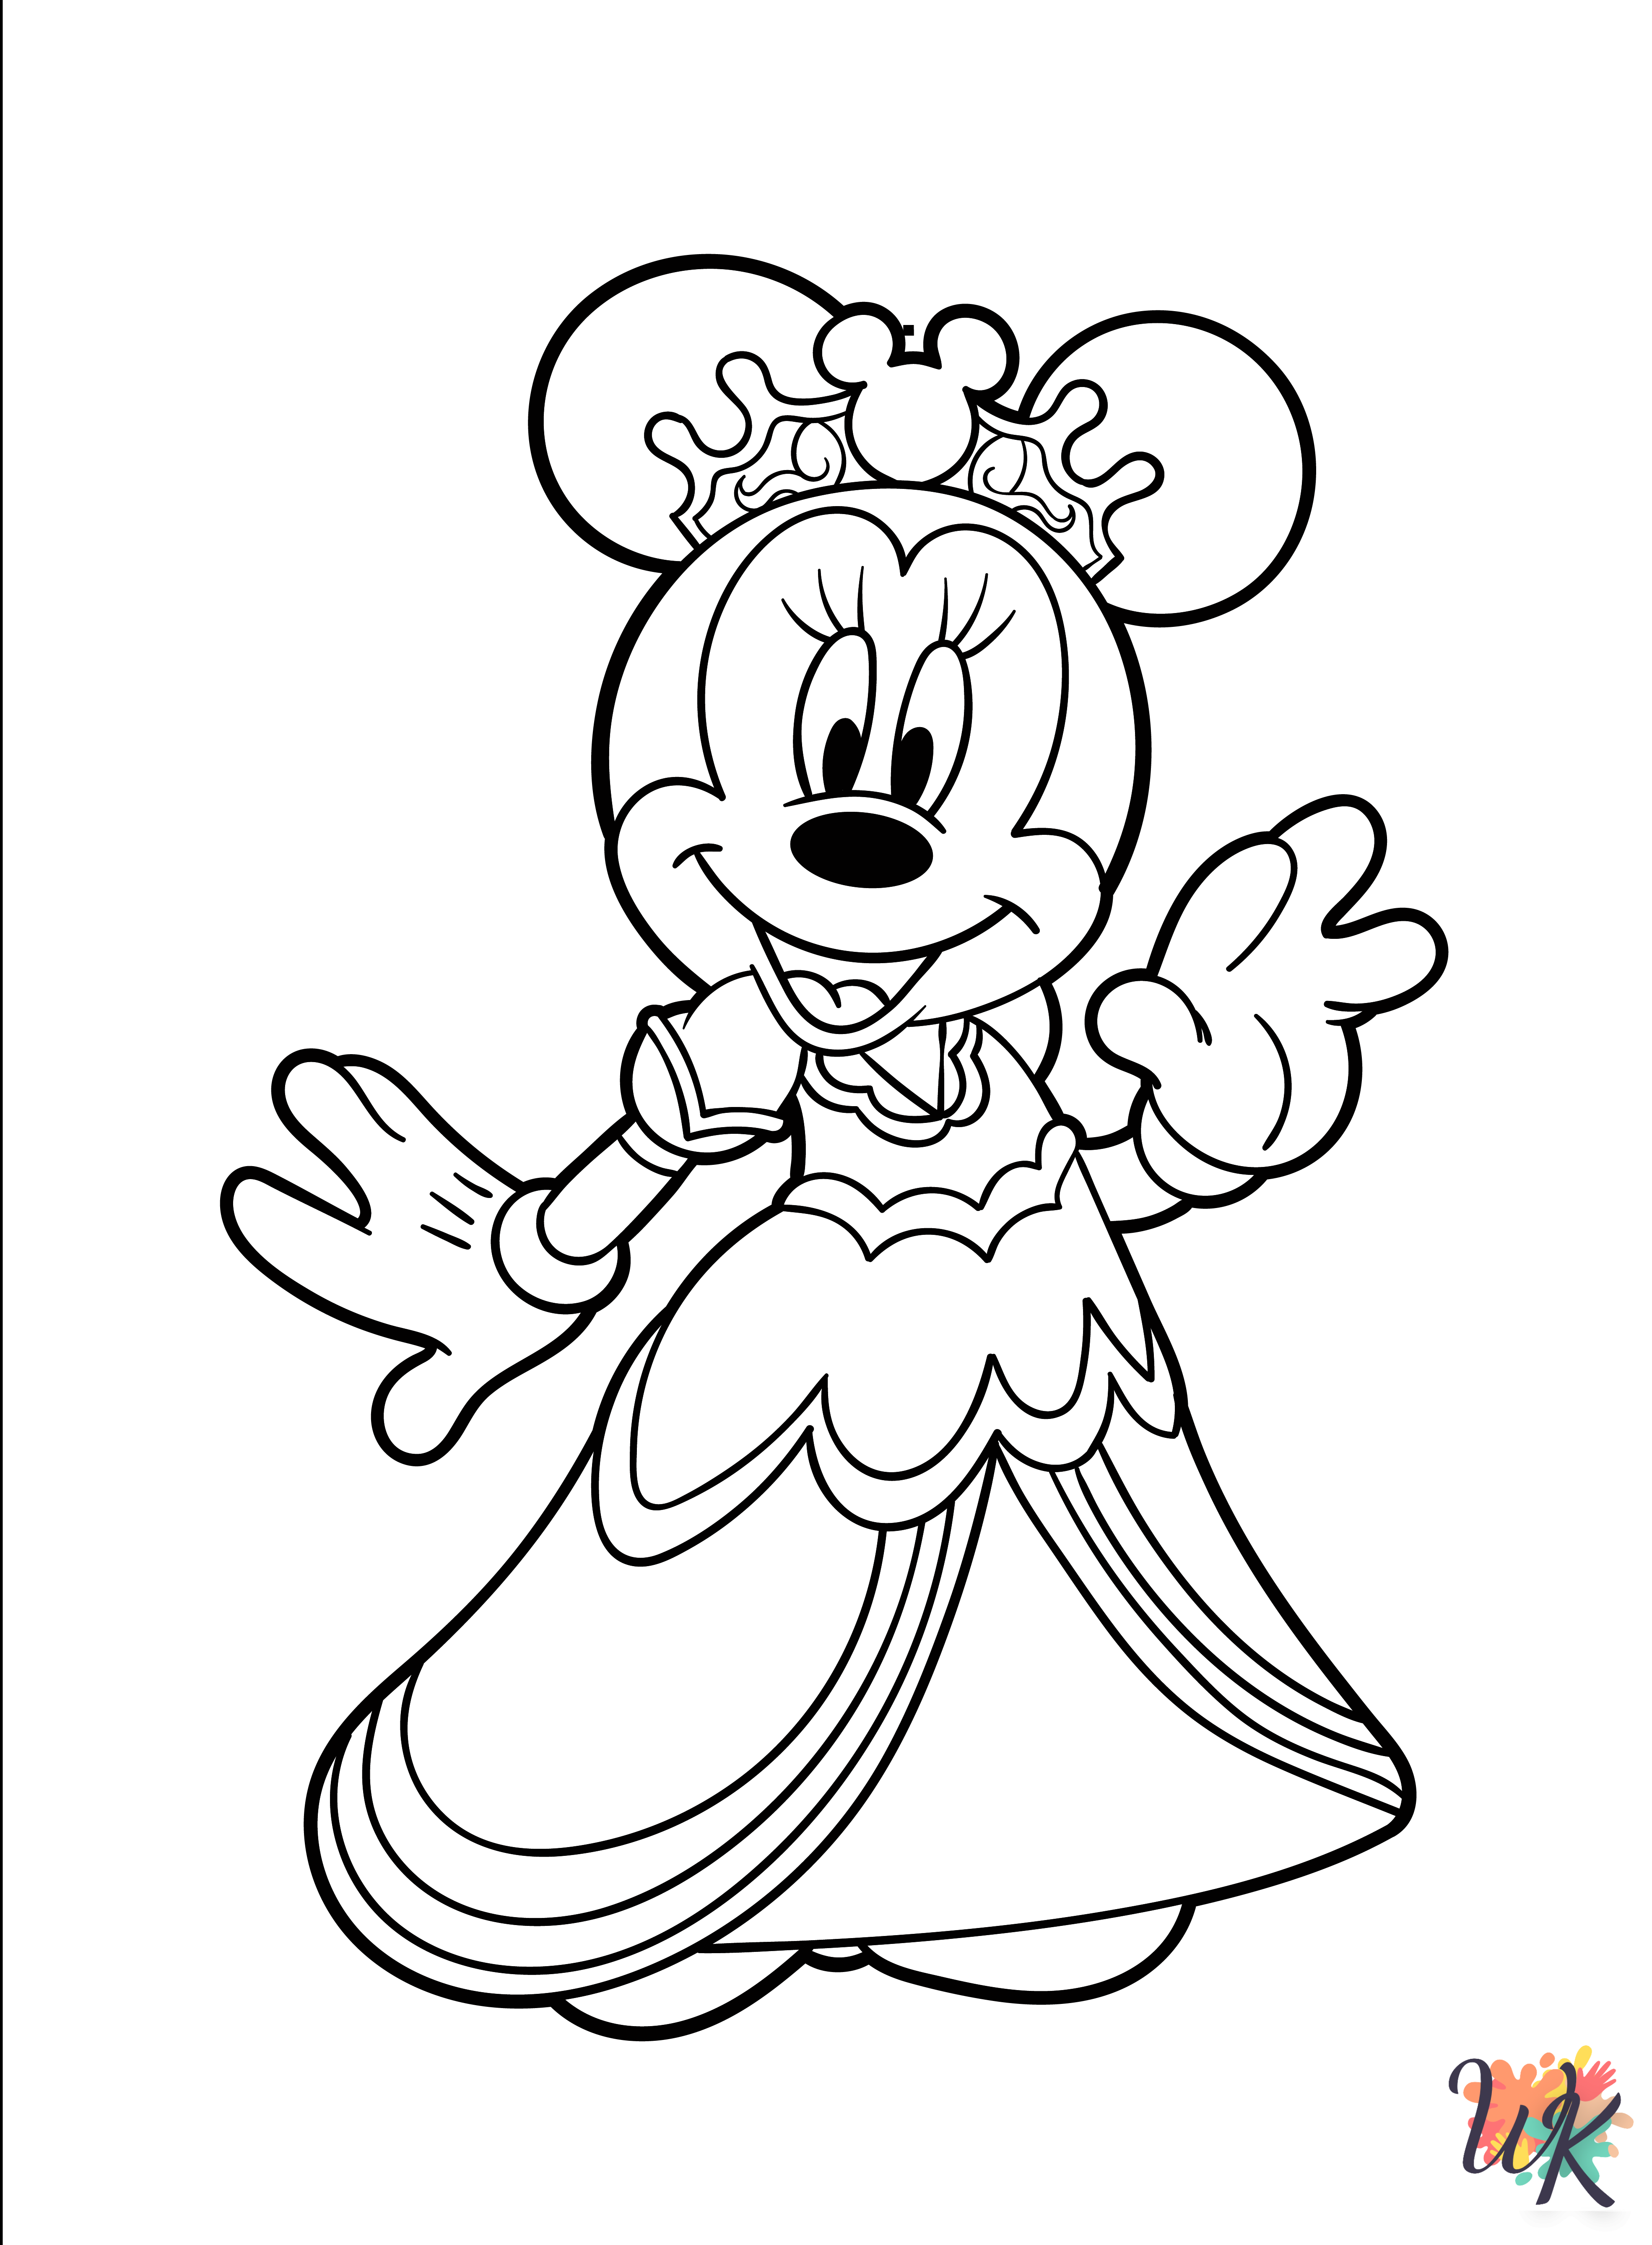 Minnie Mouse coloring pages printable free